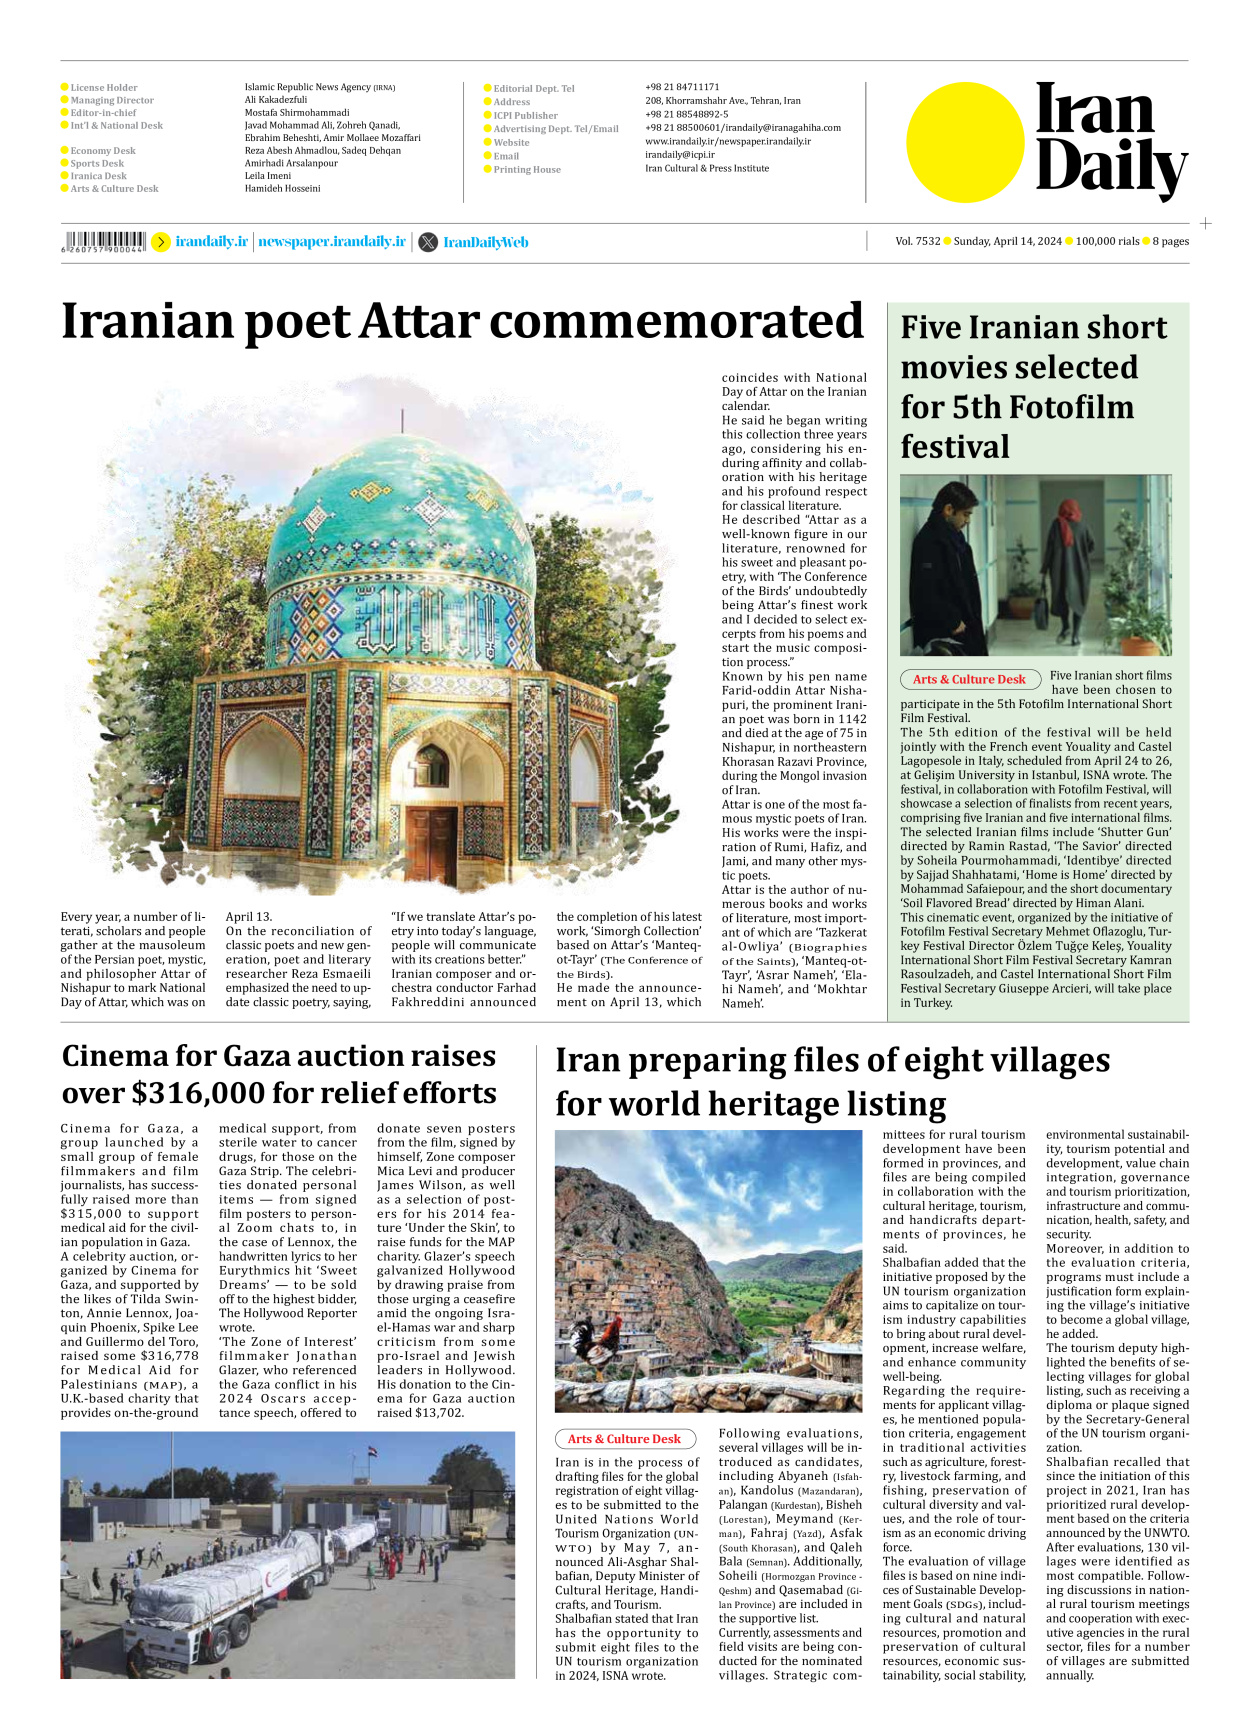 Iran Daily - Number Seven Thousand Five Hundred and Thirty Two - 14 April 2024 - Page 8